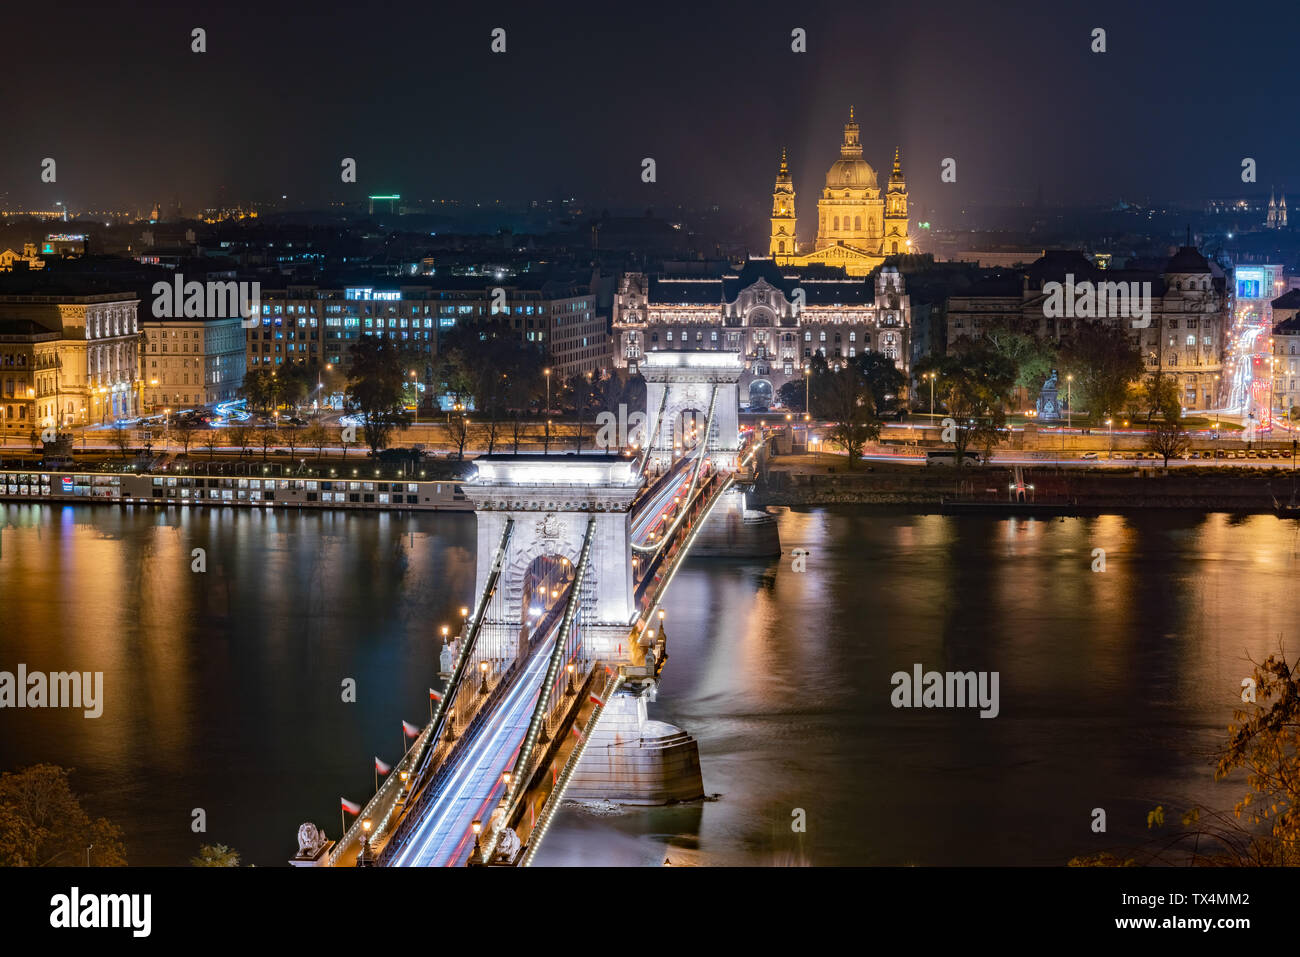 Night aerial view of the famous Széchenyi Chain Bridge with Four Seasons Hotel Gresham Palace at Budapest, Hungary Stock Photo